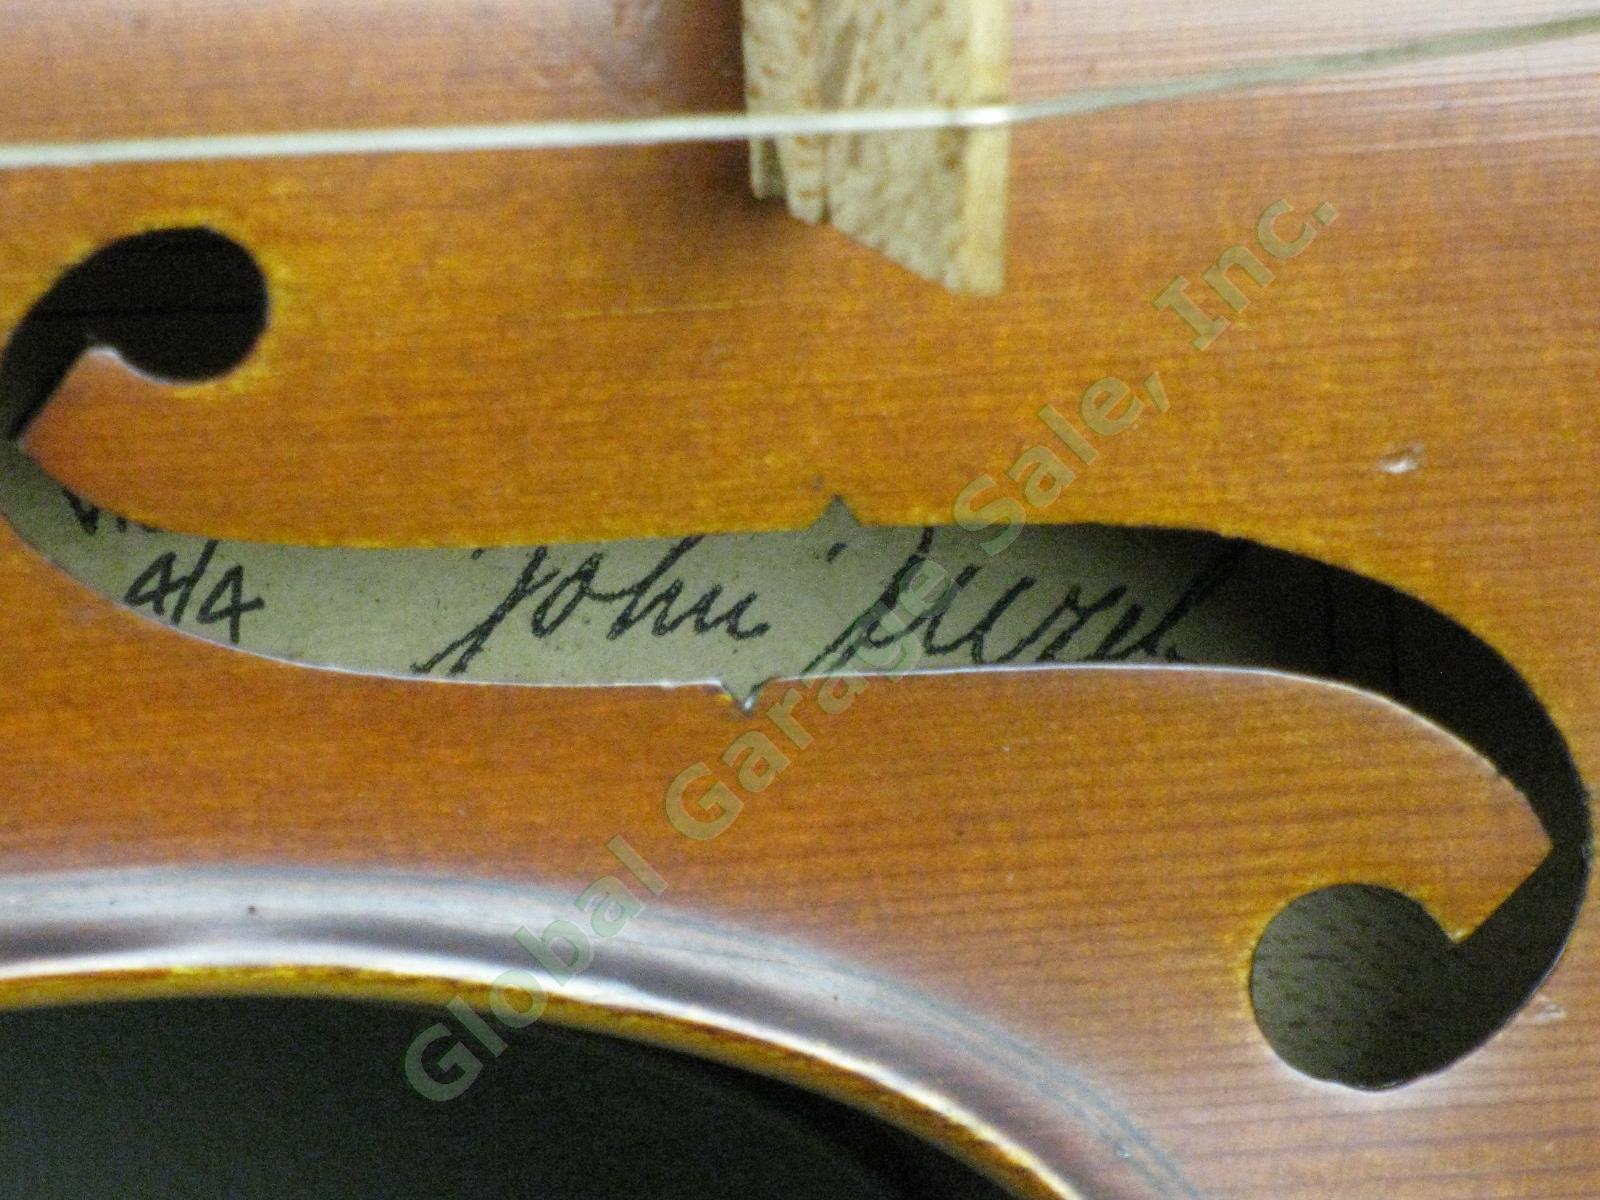 John Juzek Model #100 4/4 Full-Size Violin Outfit With Bow + Hard Case EXC COND! 13